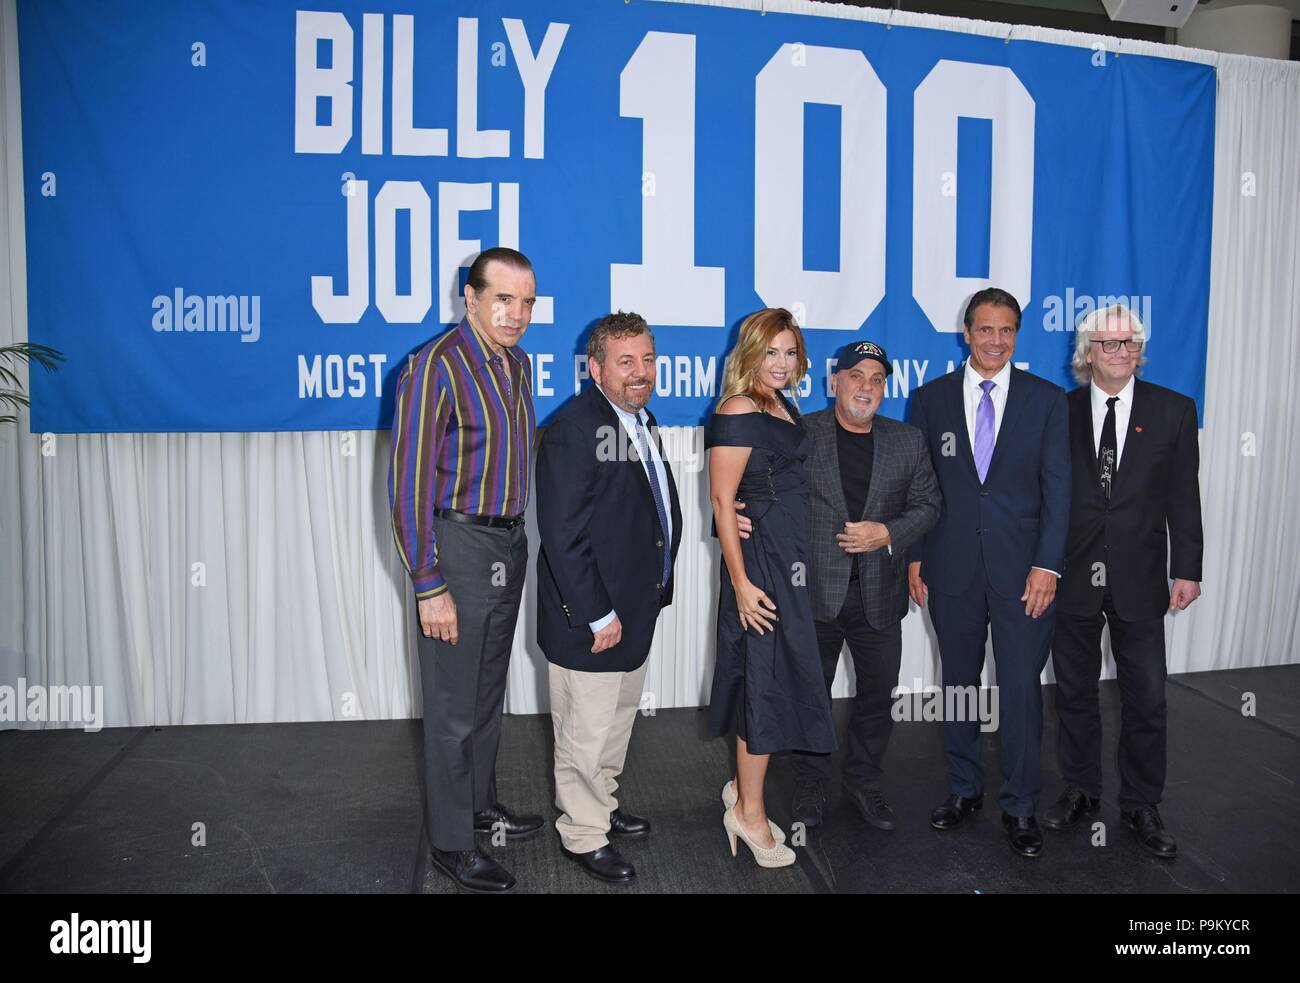 New York, NY, USA. 18th July, 2018. Chazz Palminteri, James L. Dolan, Alexis Roderick, Billy Joel, Governor Andrew M. Cuomo, Jim Kerr at a public appearance for Billy Joel Celebrates 100th Performance at MSG, Madison Square Garden, New York, NY July 18, 2018. Credit: Derek Storm/Everett Collection/Alamy Live News Stock Photo